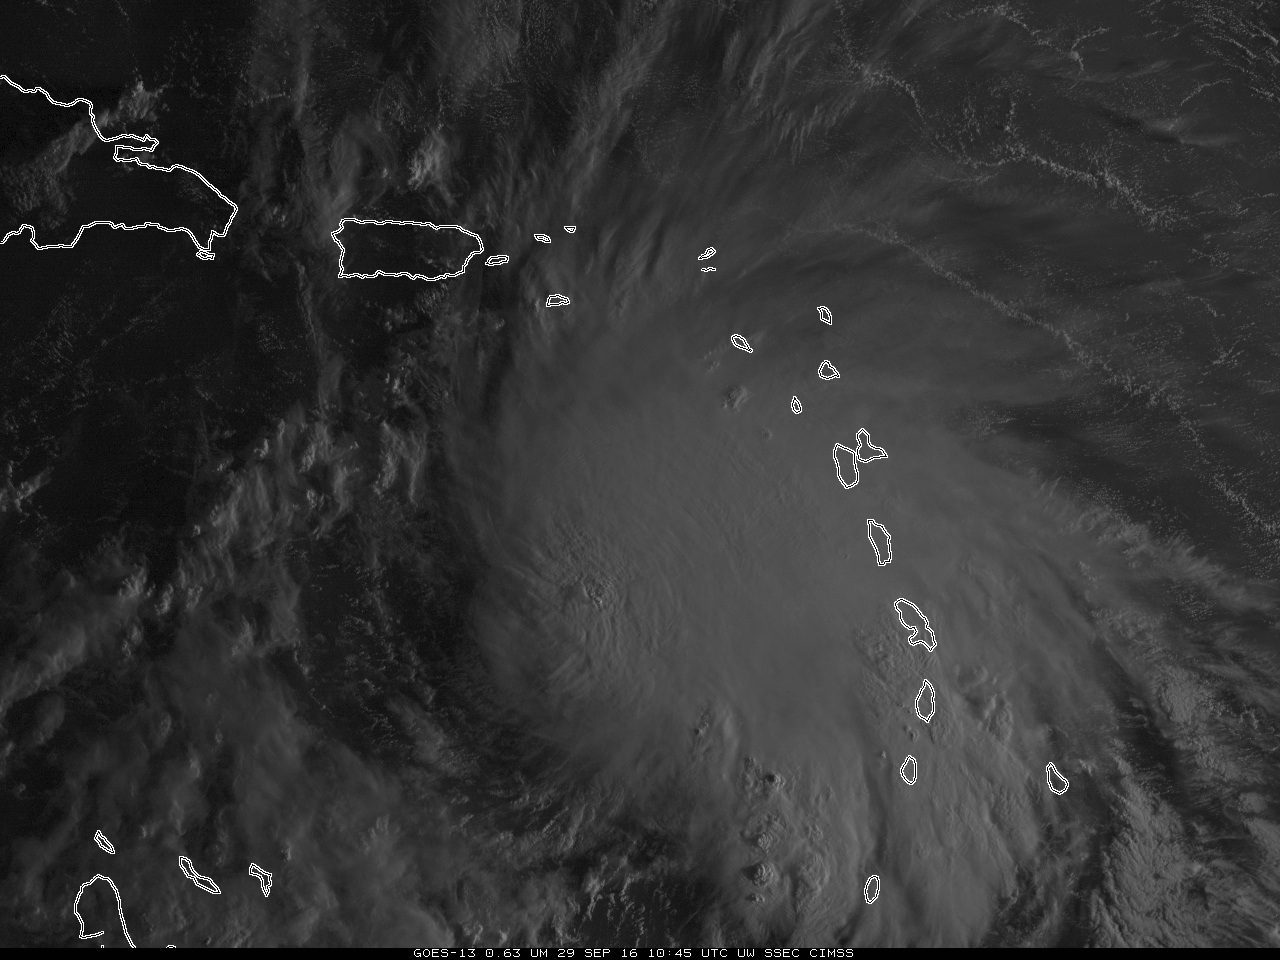 GOES-13 Visible (0.63 µm) imagery, 1045-1245 UTC on 29 September 2016 [Click to enlarge]